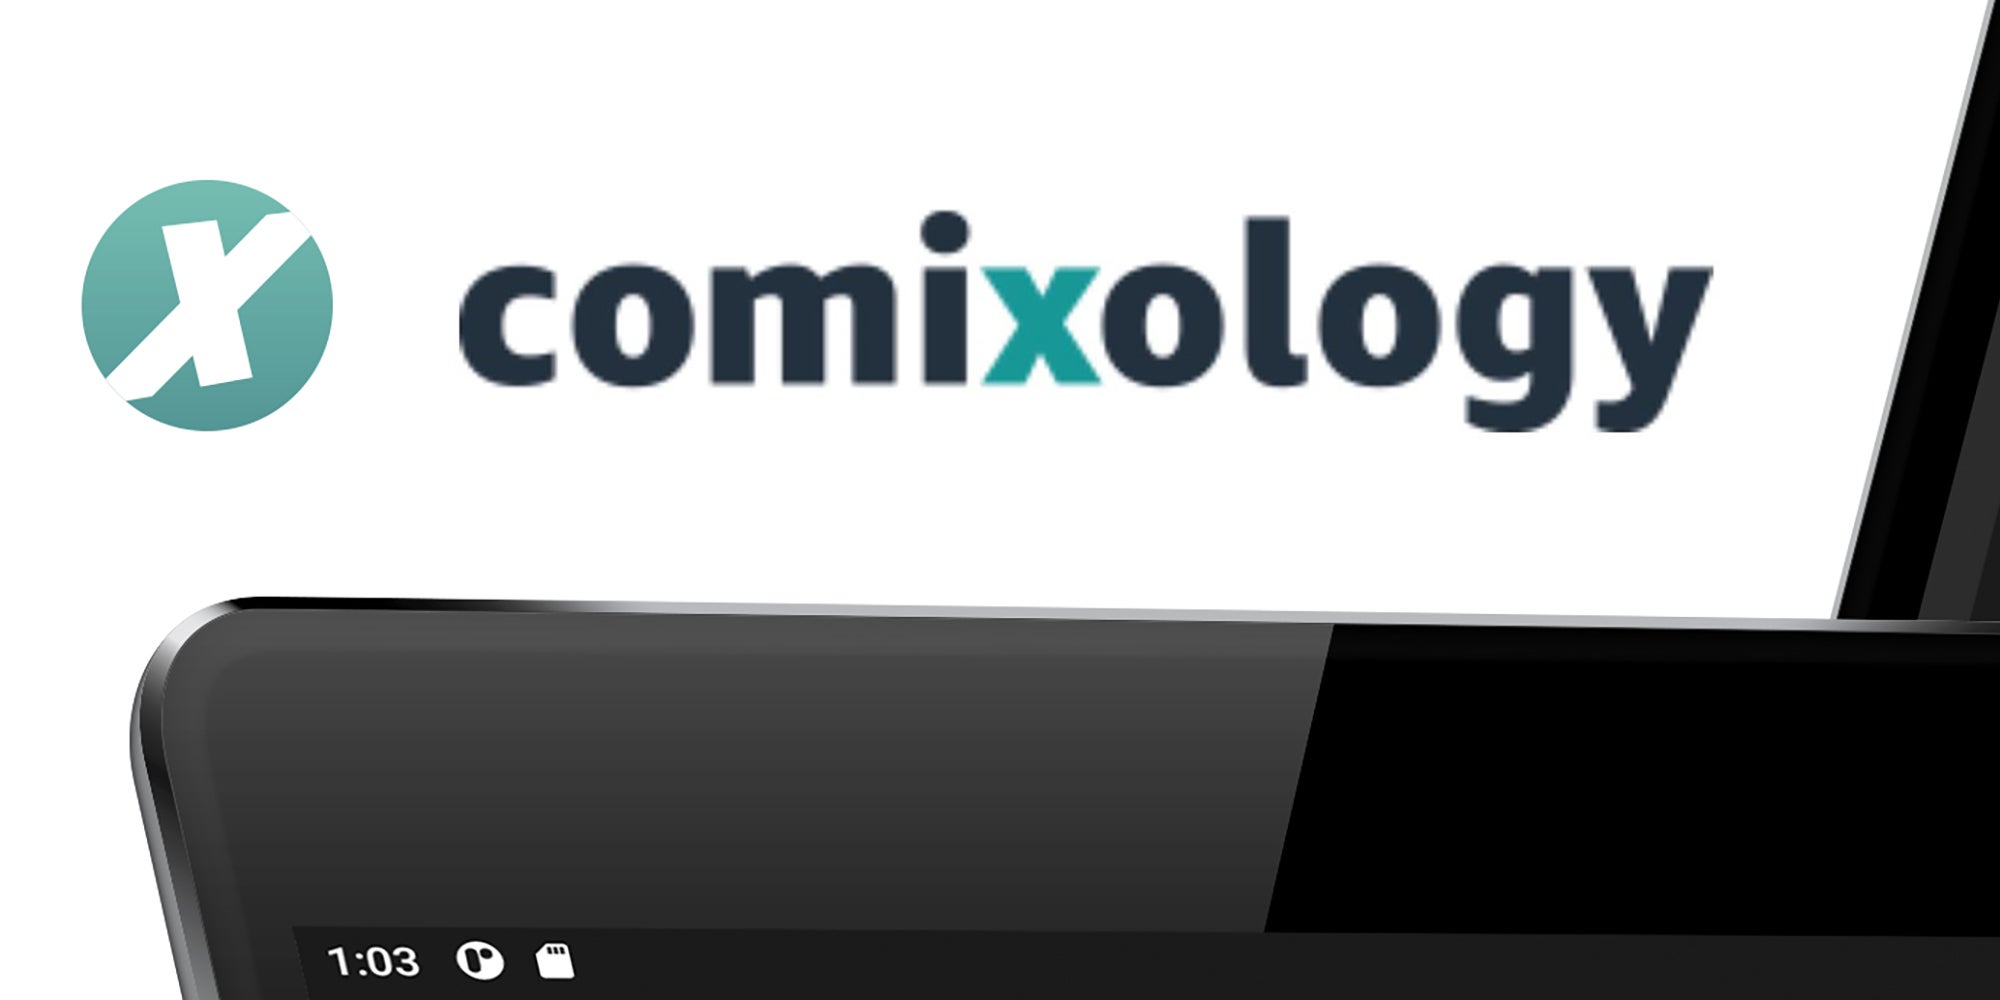 Image for Digital comics platform Comixology hit by Amazon layoffs impacting more than half the company